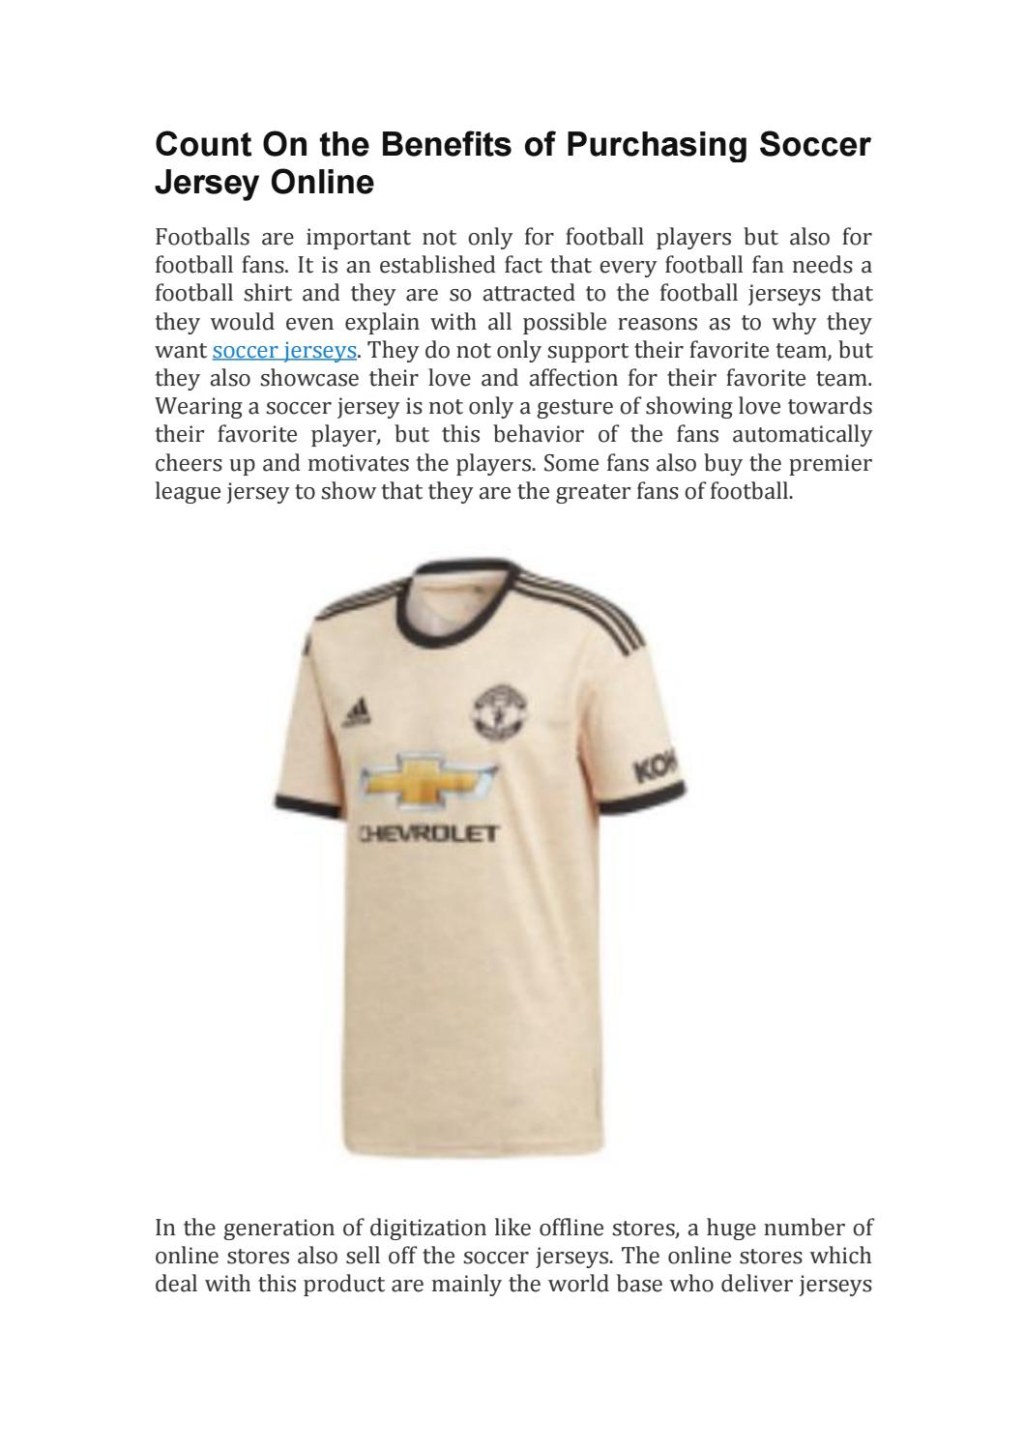 Picture of: Count On the Benefits of Purchasing Soccer Jersey Online by Goal